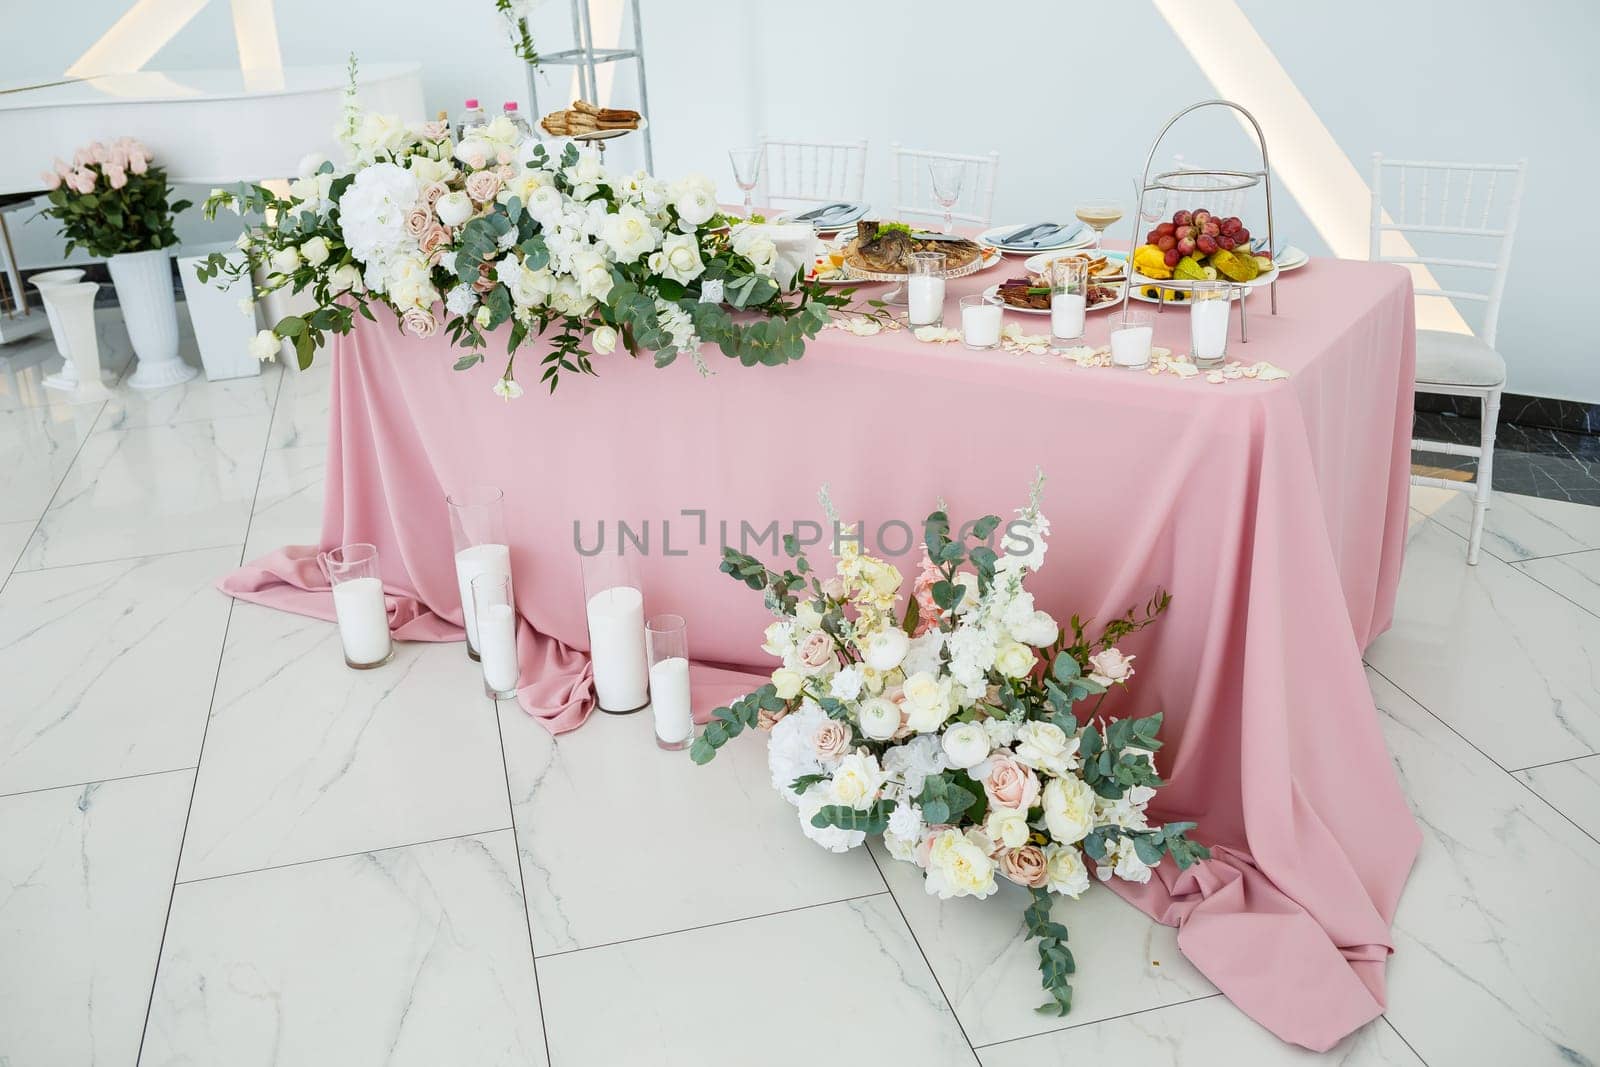 Wedding table decor for newlyweds decorations with fresh flowers